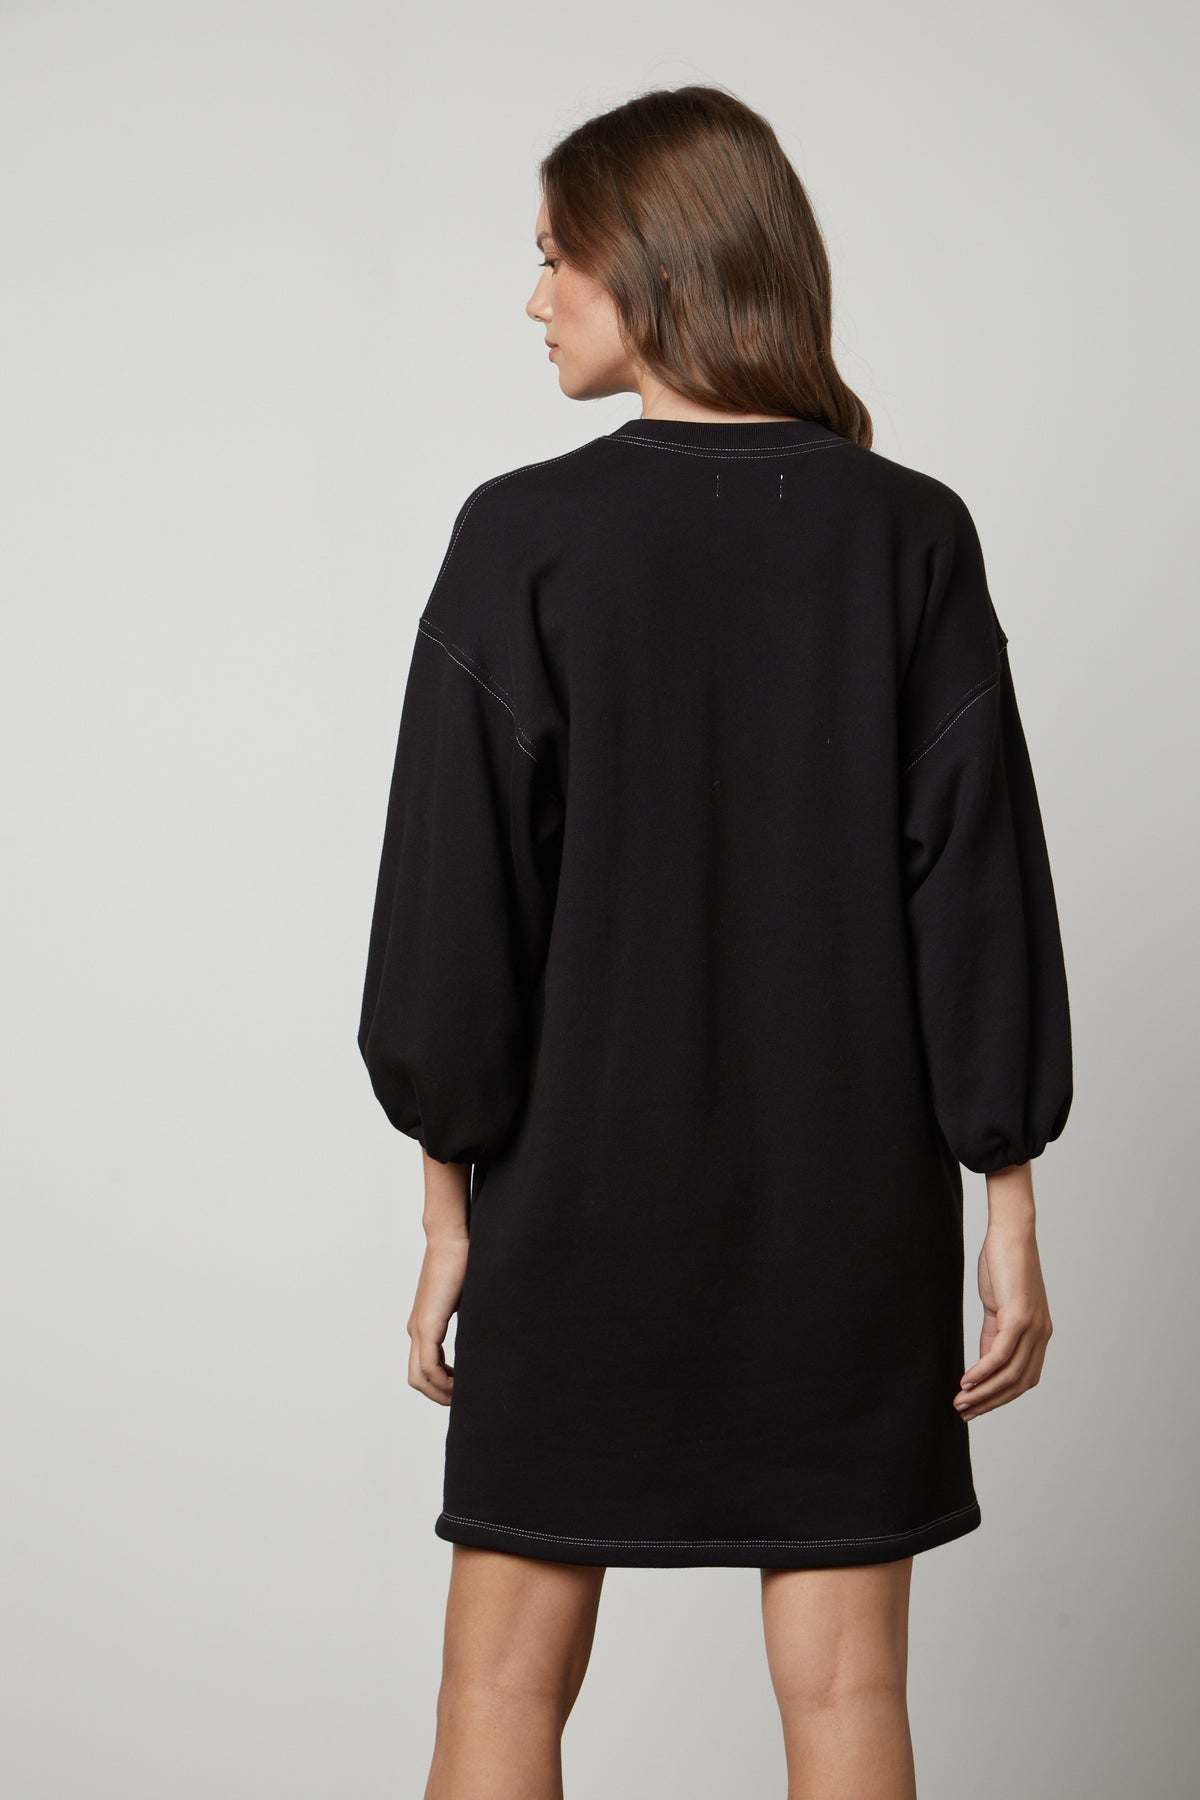 The back view of a woman wearing a Velvet by Graham & Spencer JENSEN PUFF SLEEVE DRESS.-26883616899265